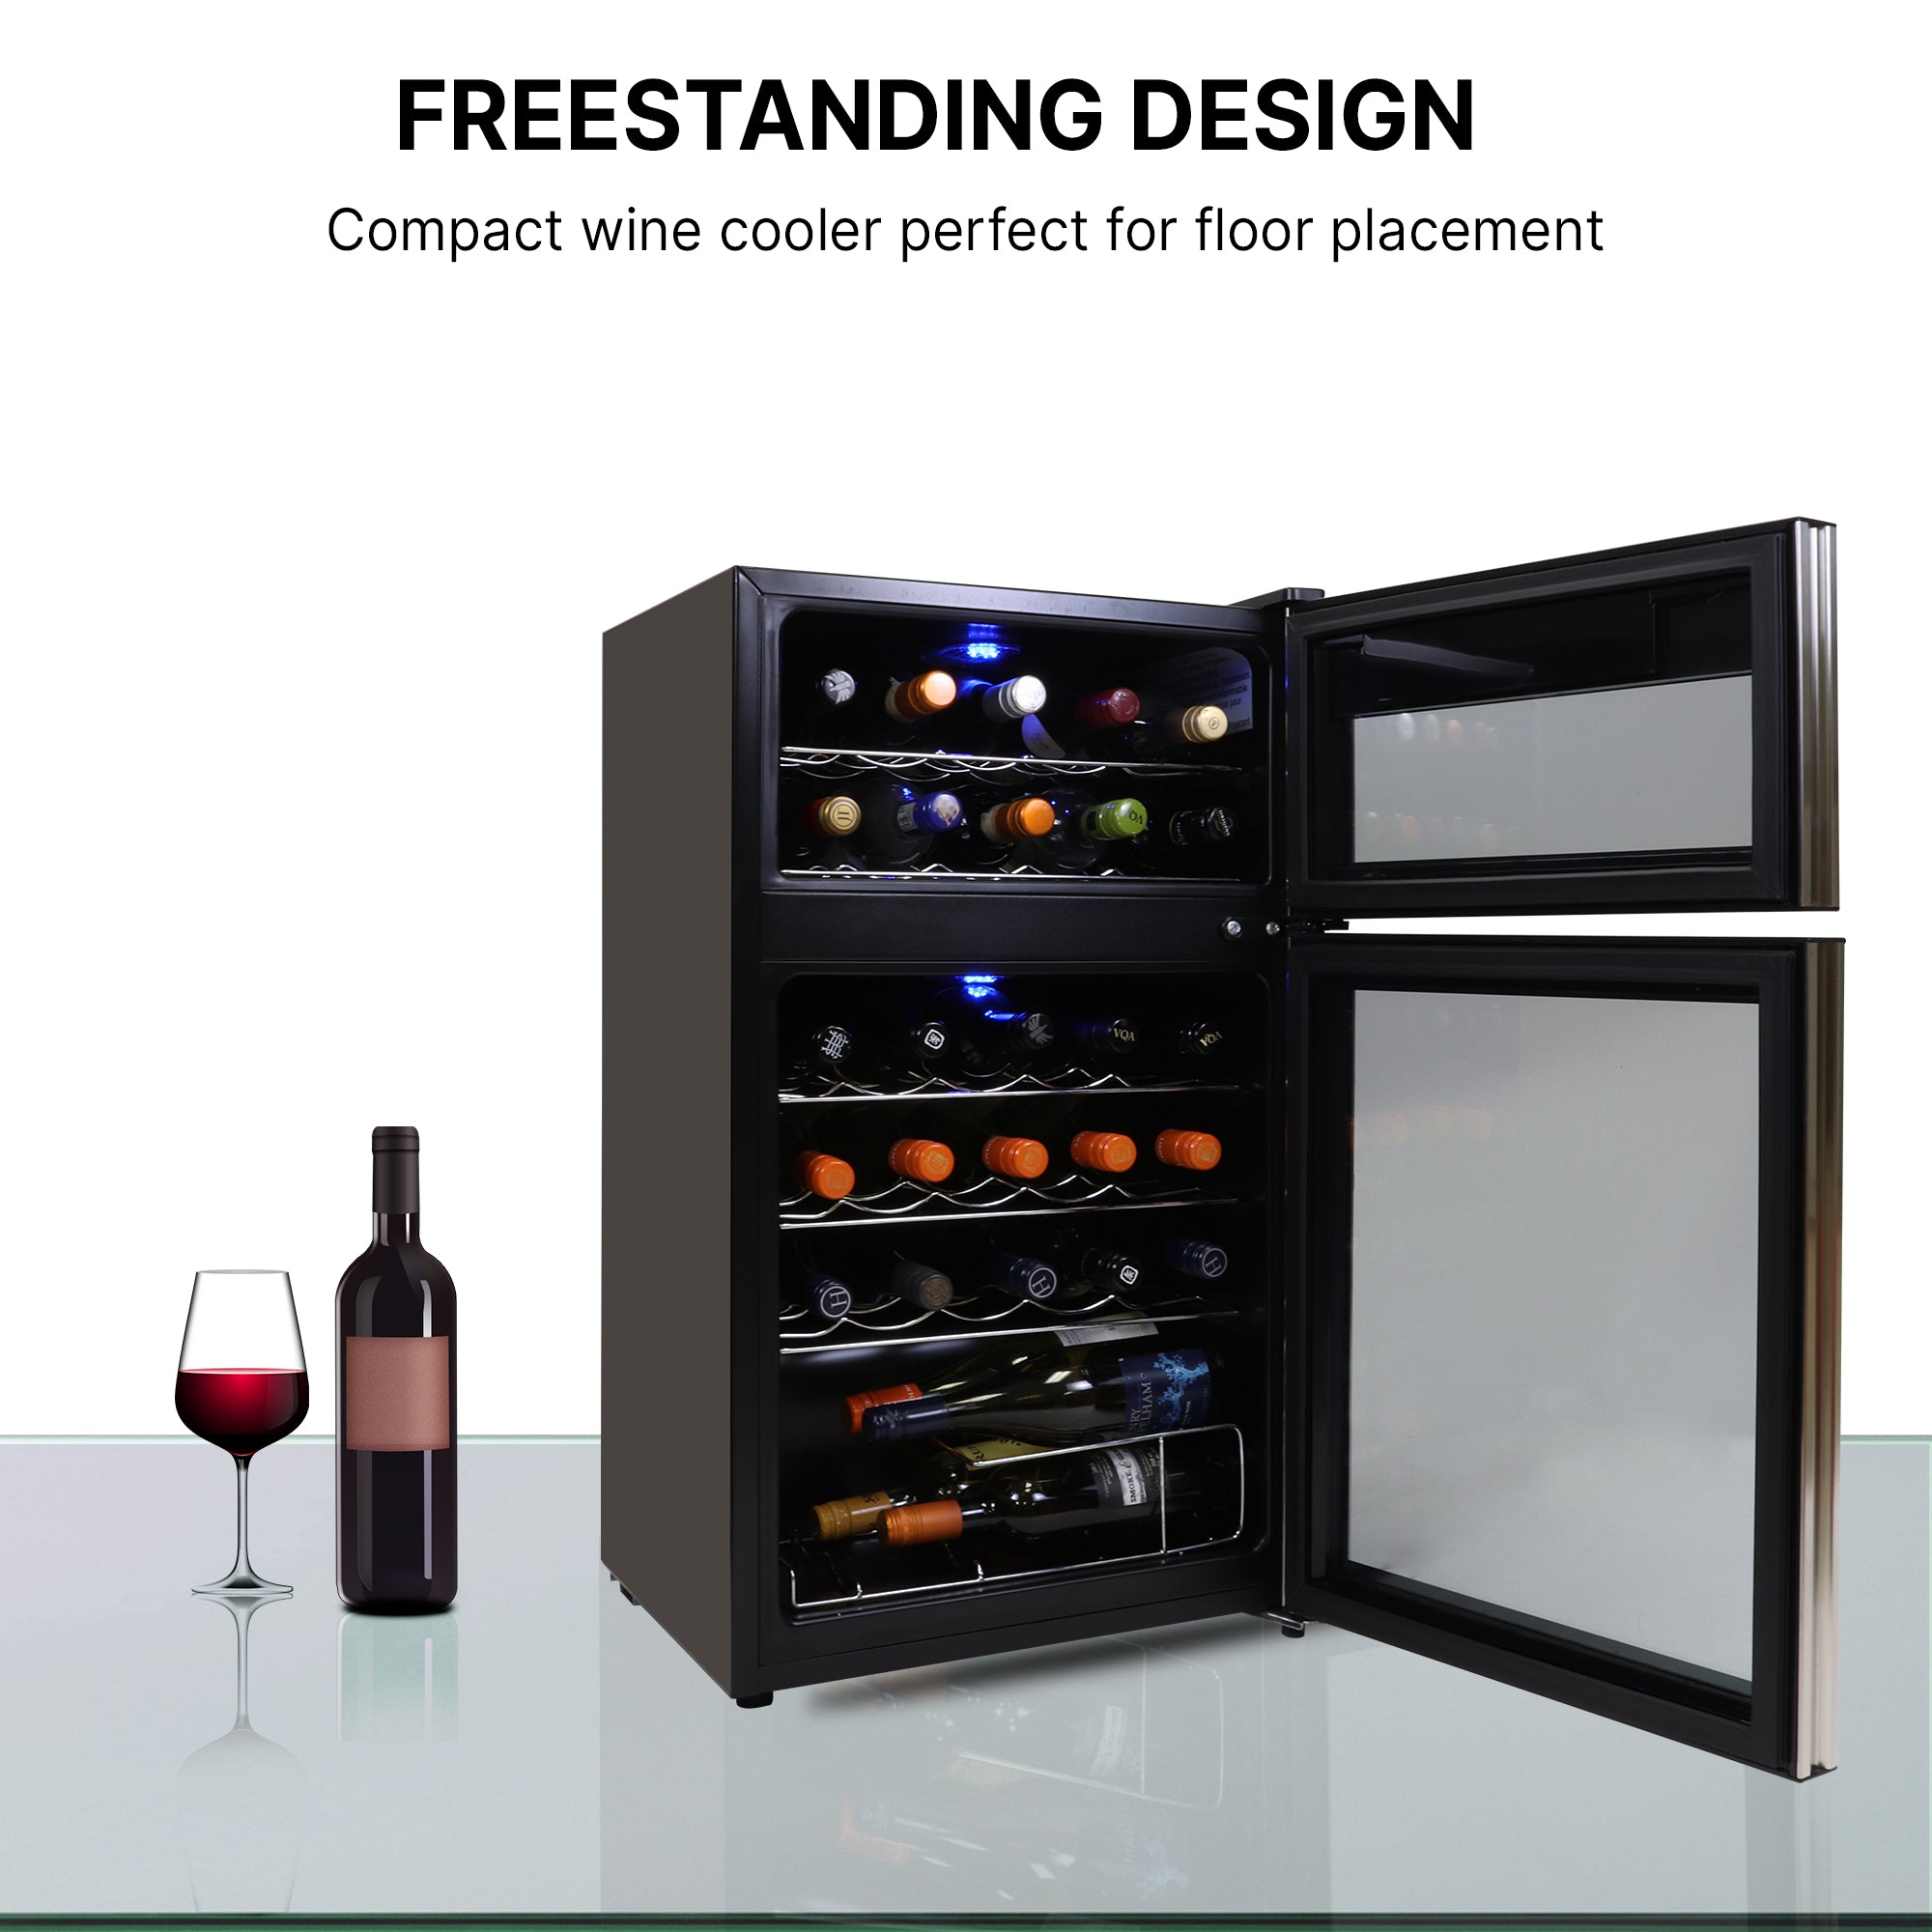 Koolatron 29 bottle dual zone wine fridge, open, with a bottle and glass of red wine to the left; Text above reads "Freestanding design: Compact wine cooler perfect for floor placement"